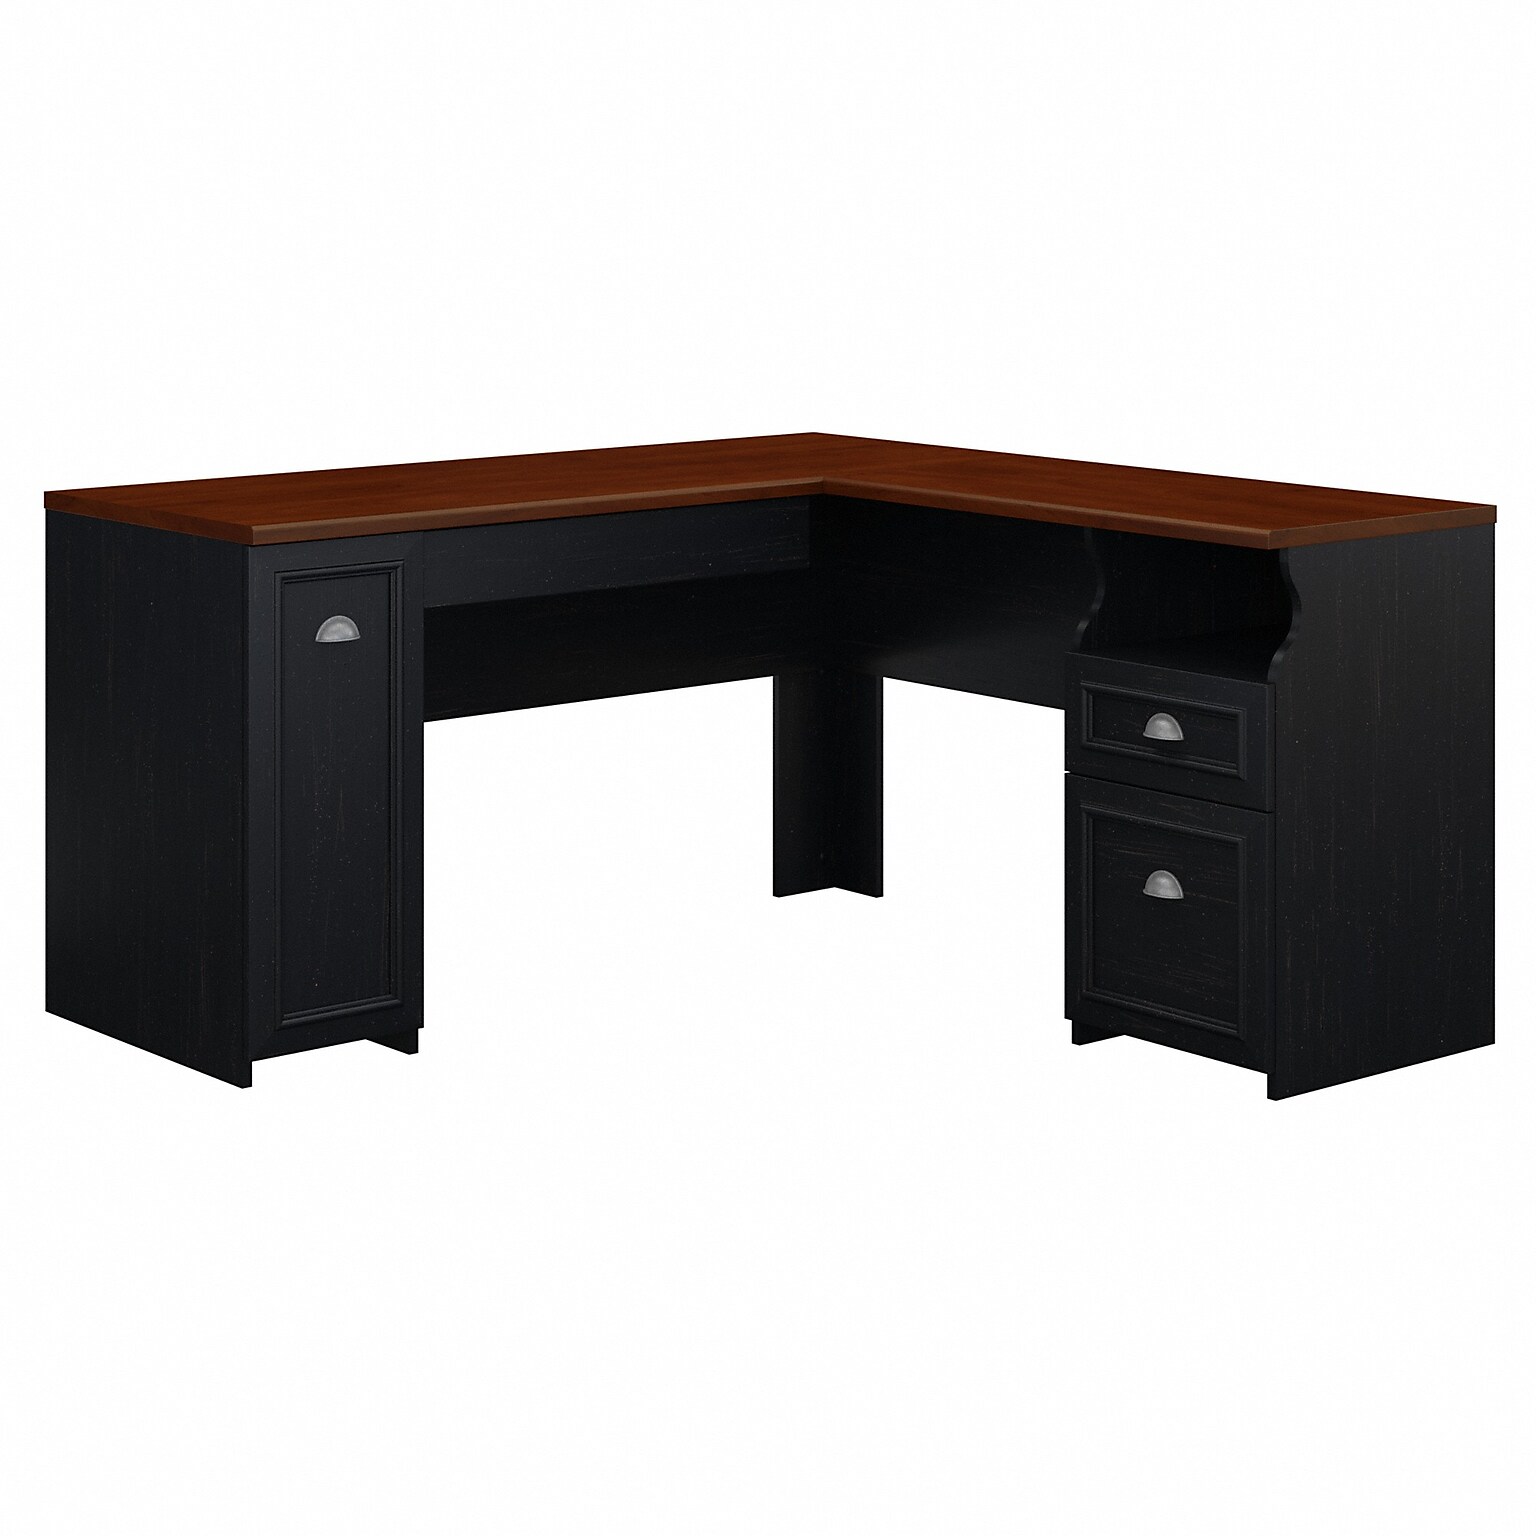 Bush Furniture Fairview 60W L Shaped Desk with Drawers and Storage Cabinet, Antique Black/Hansen Cherry (WC53930-03K)